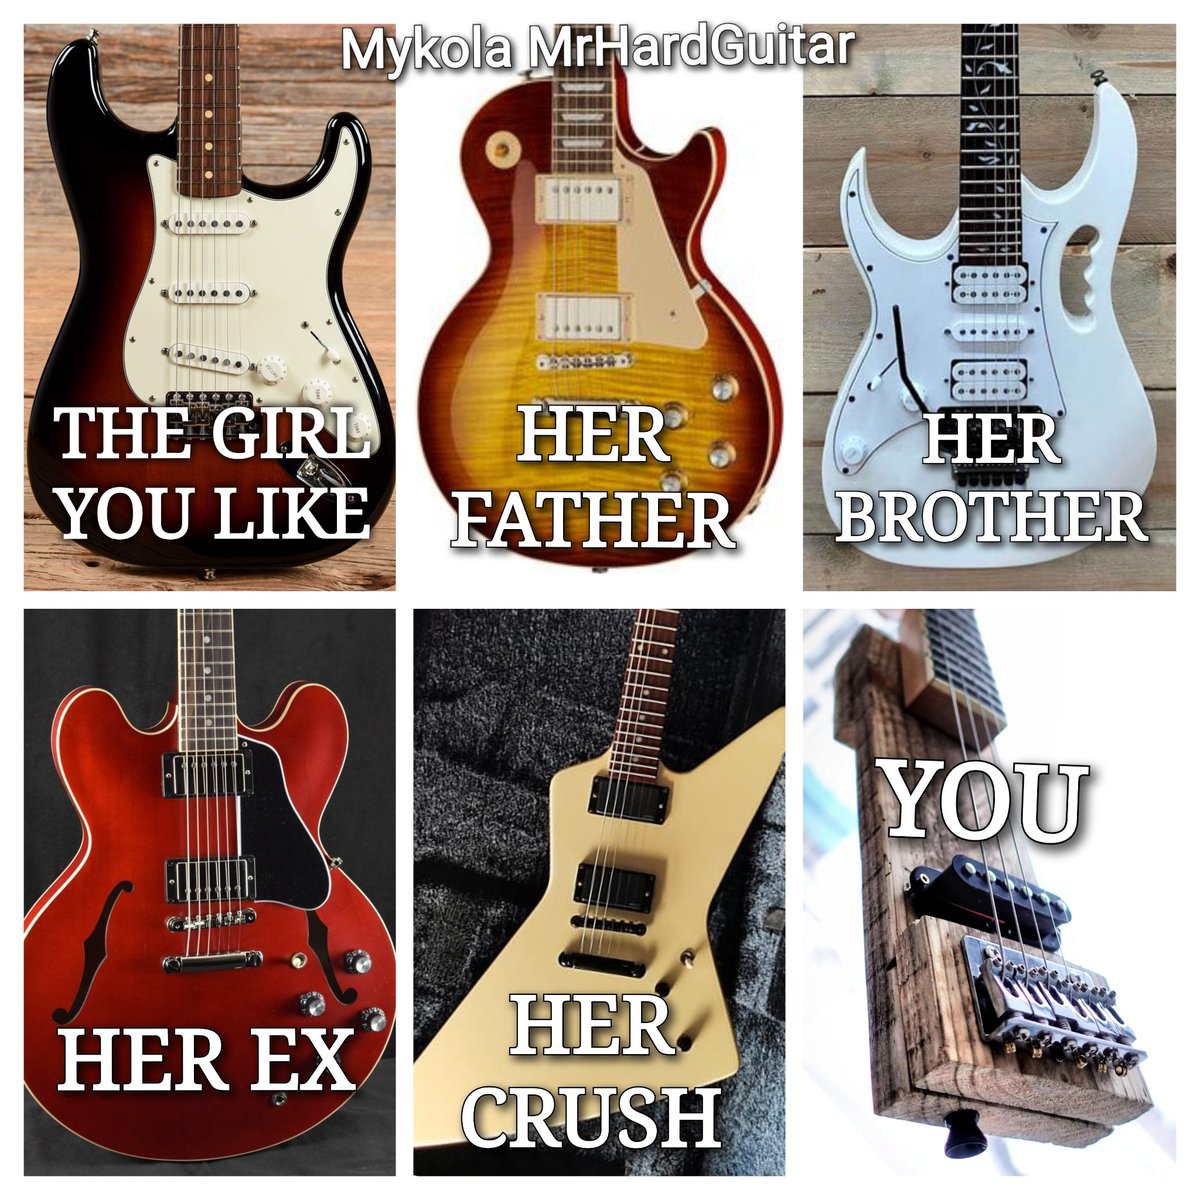 Made a meme about my new PERFECT (for me) guitar 😁

#guitar #guitars #guitarist #guitarists #musician #musicians #diyguitar #diy #handmadeguitar #handmadeguitars #luthier